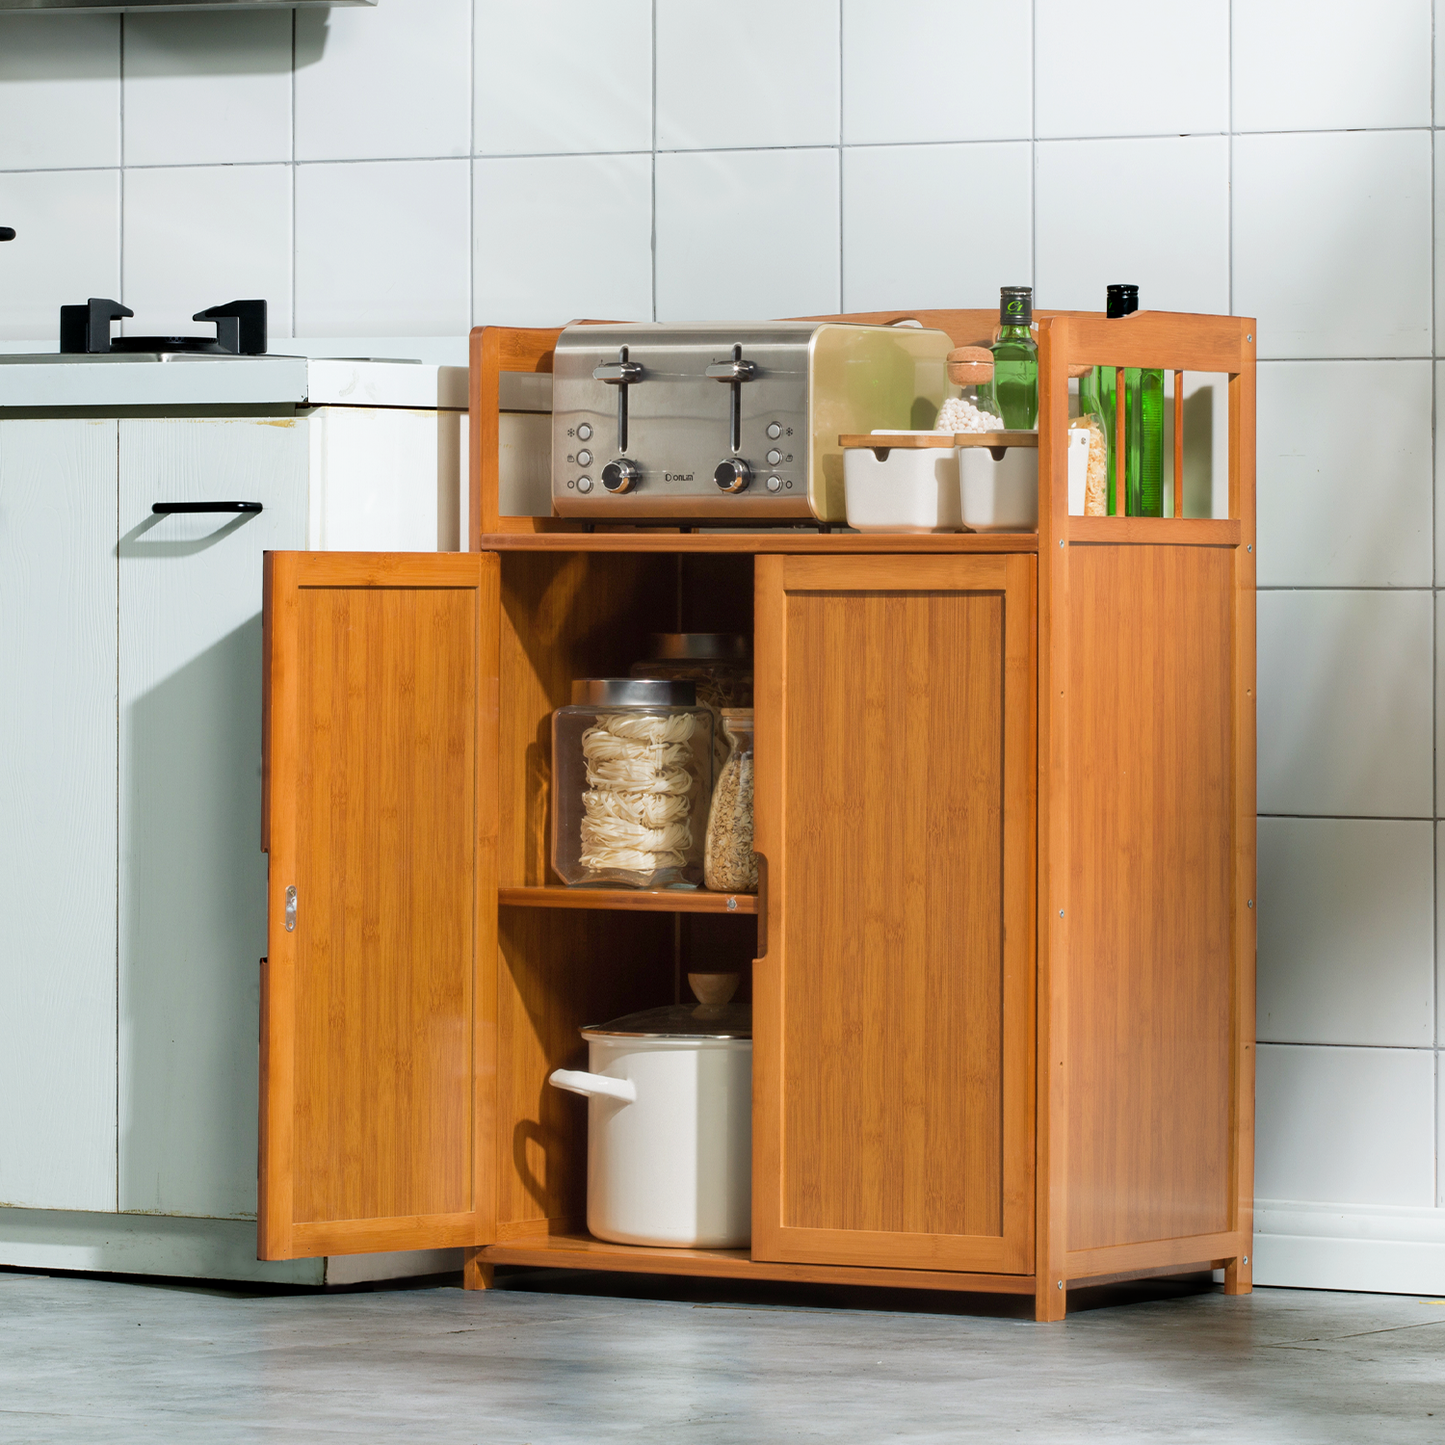 Two Doors Bottom Space Cupboard - Natural